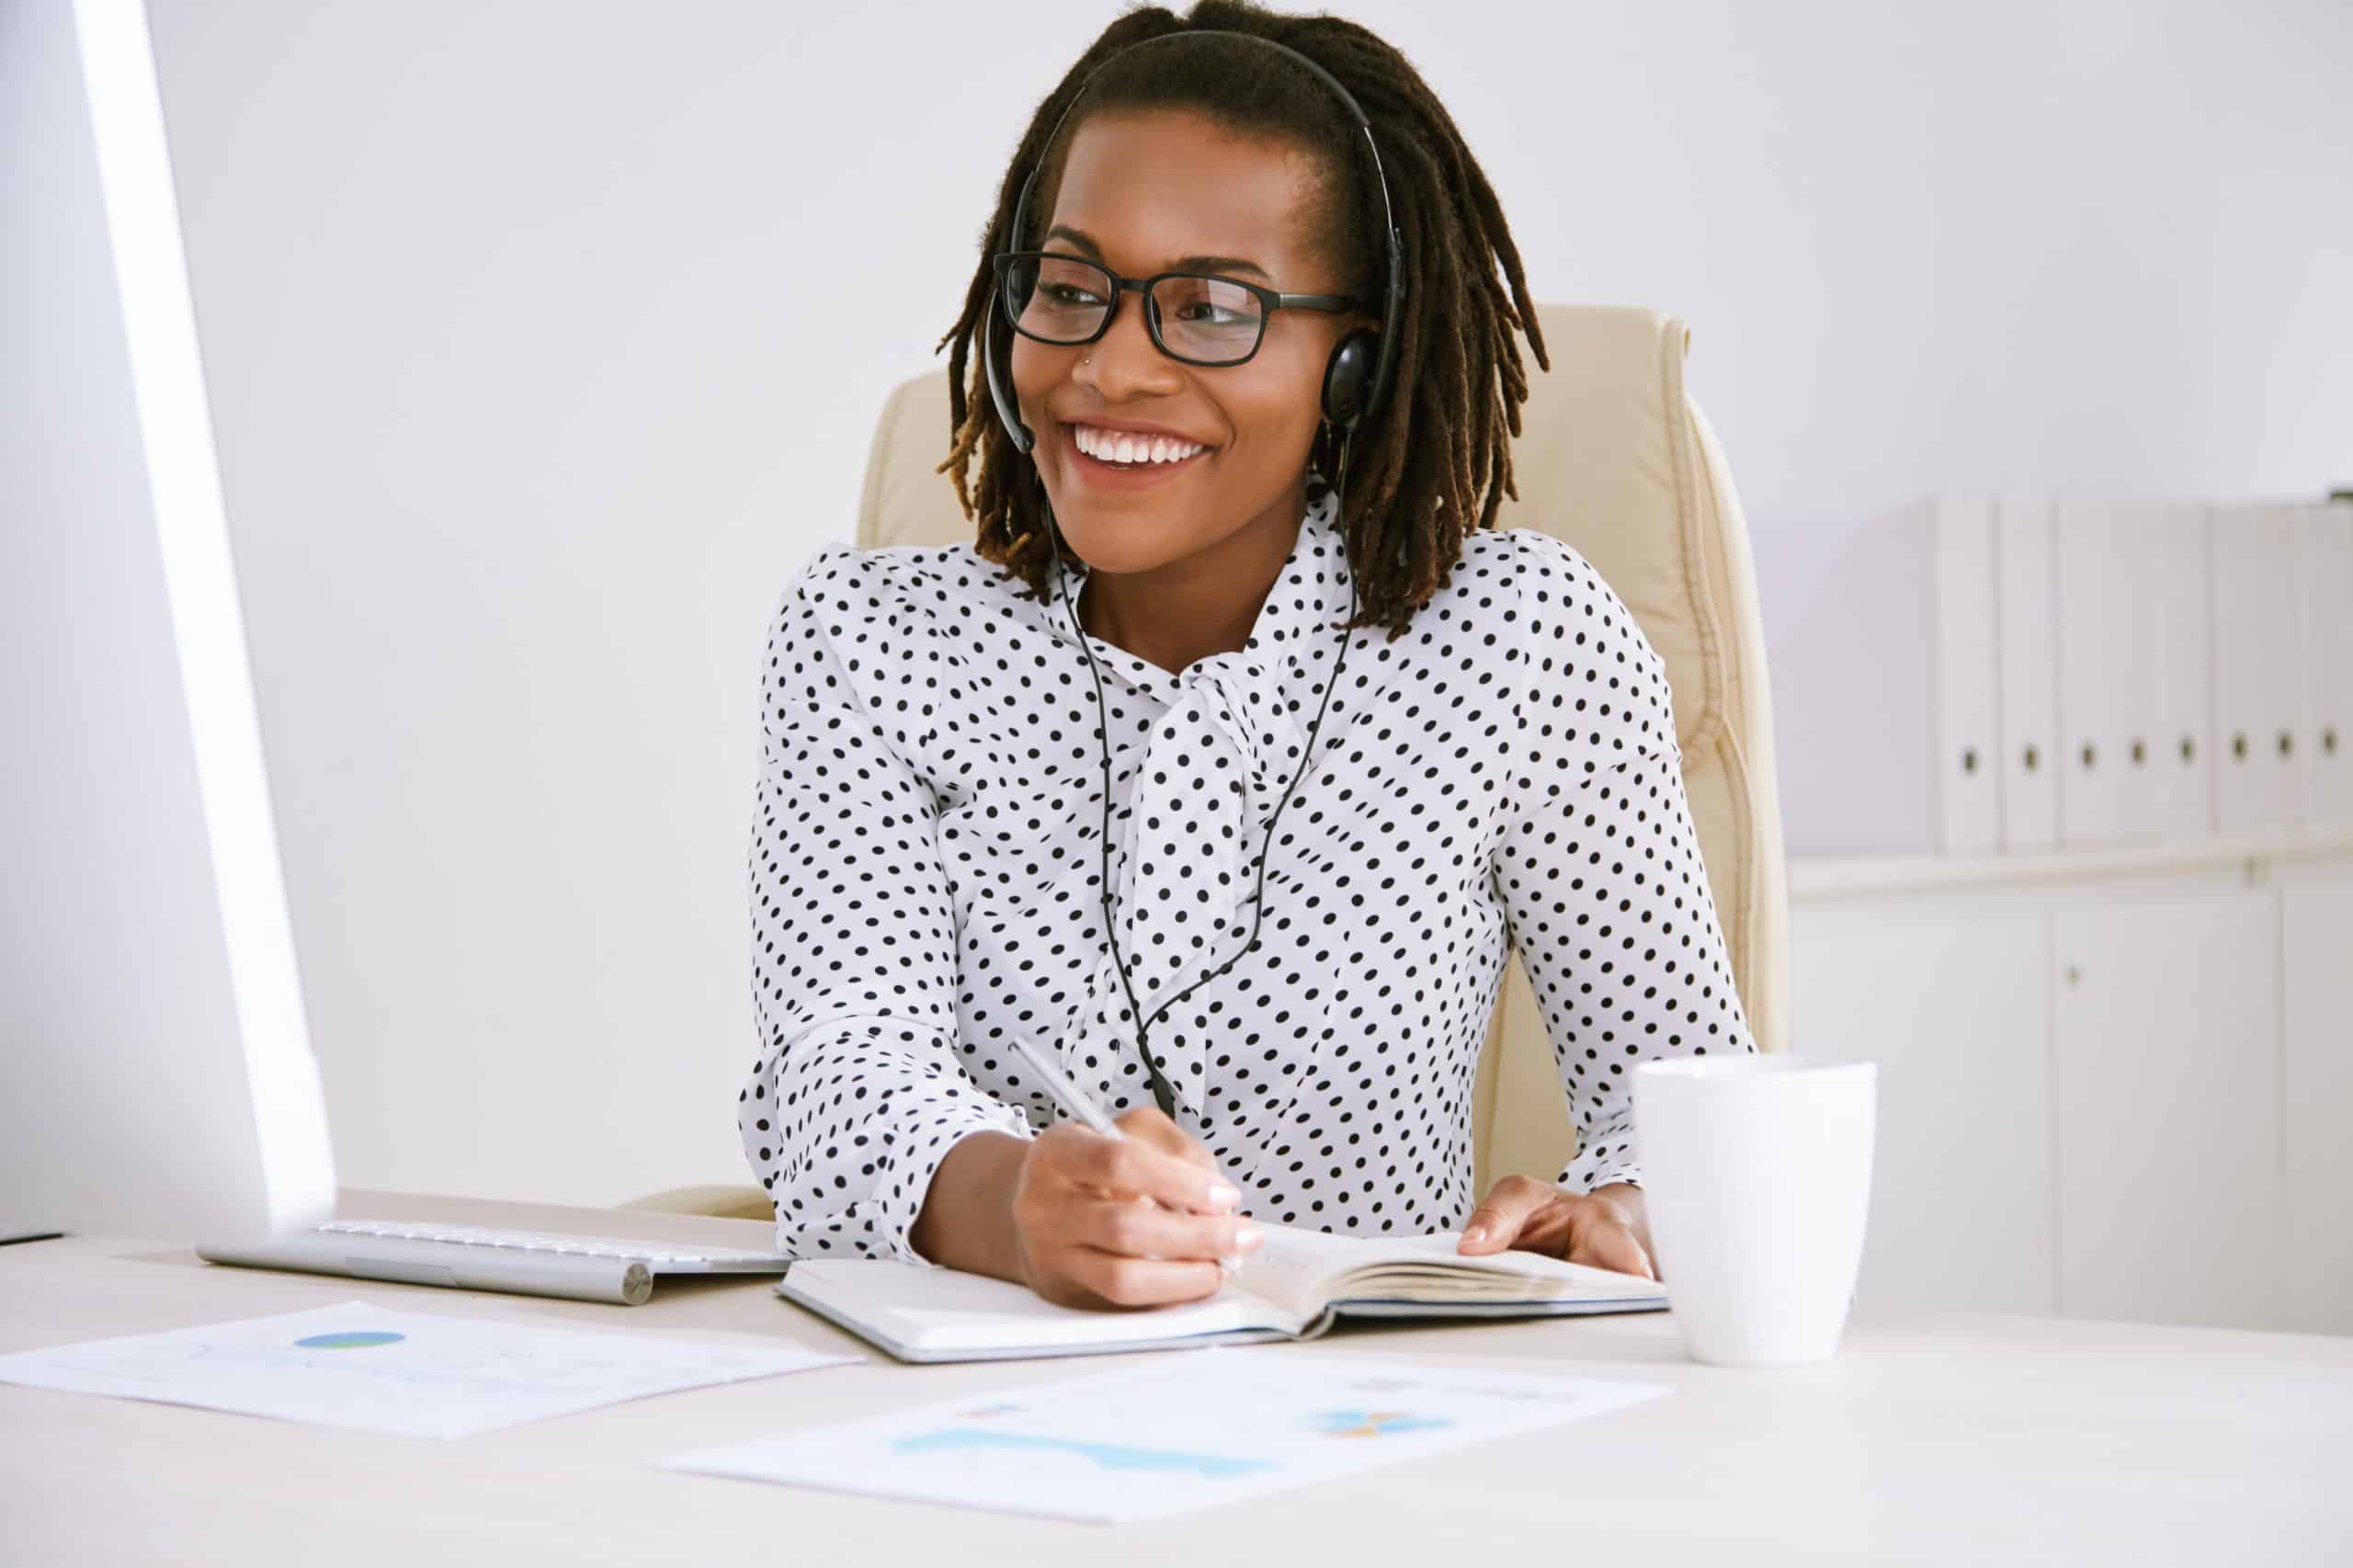 Cheerful smiling female entrepreneur using headset to talk to coworker and taking notes